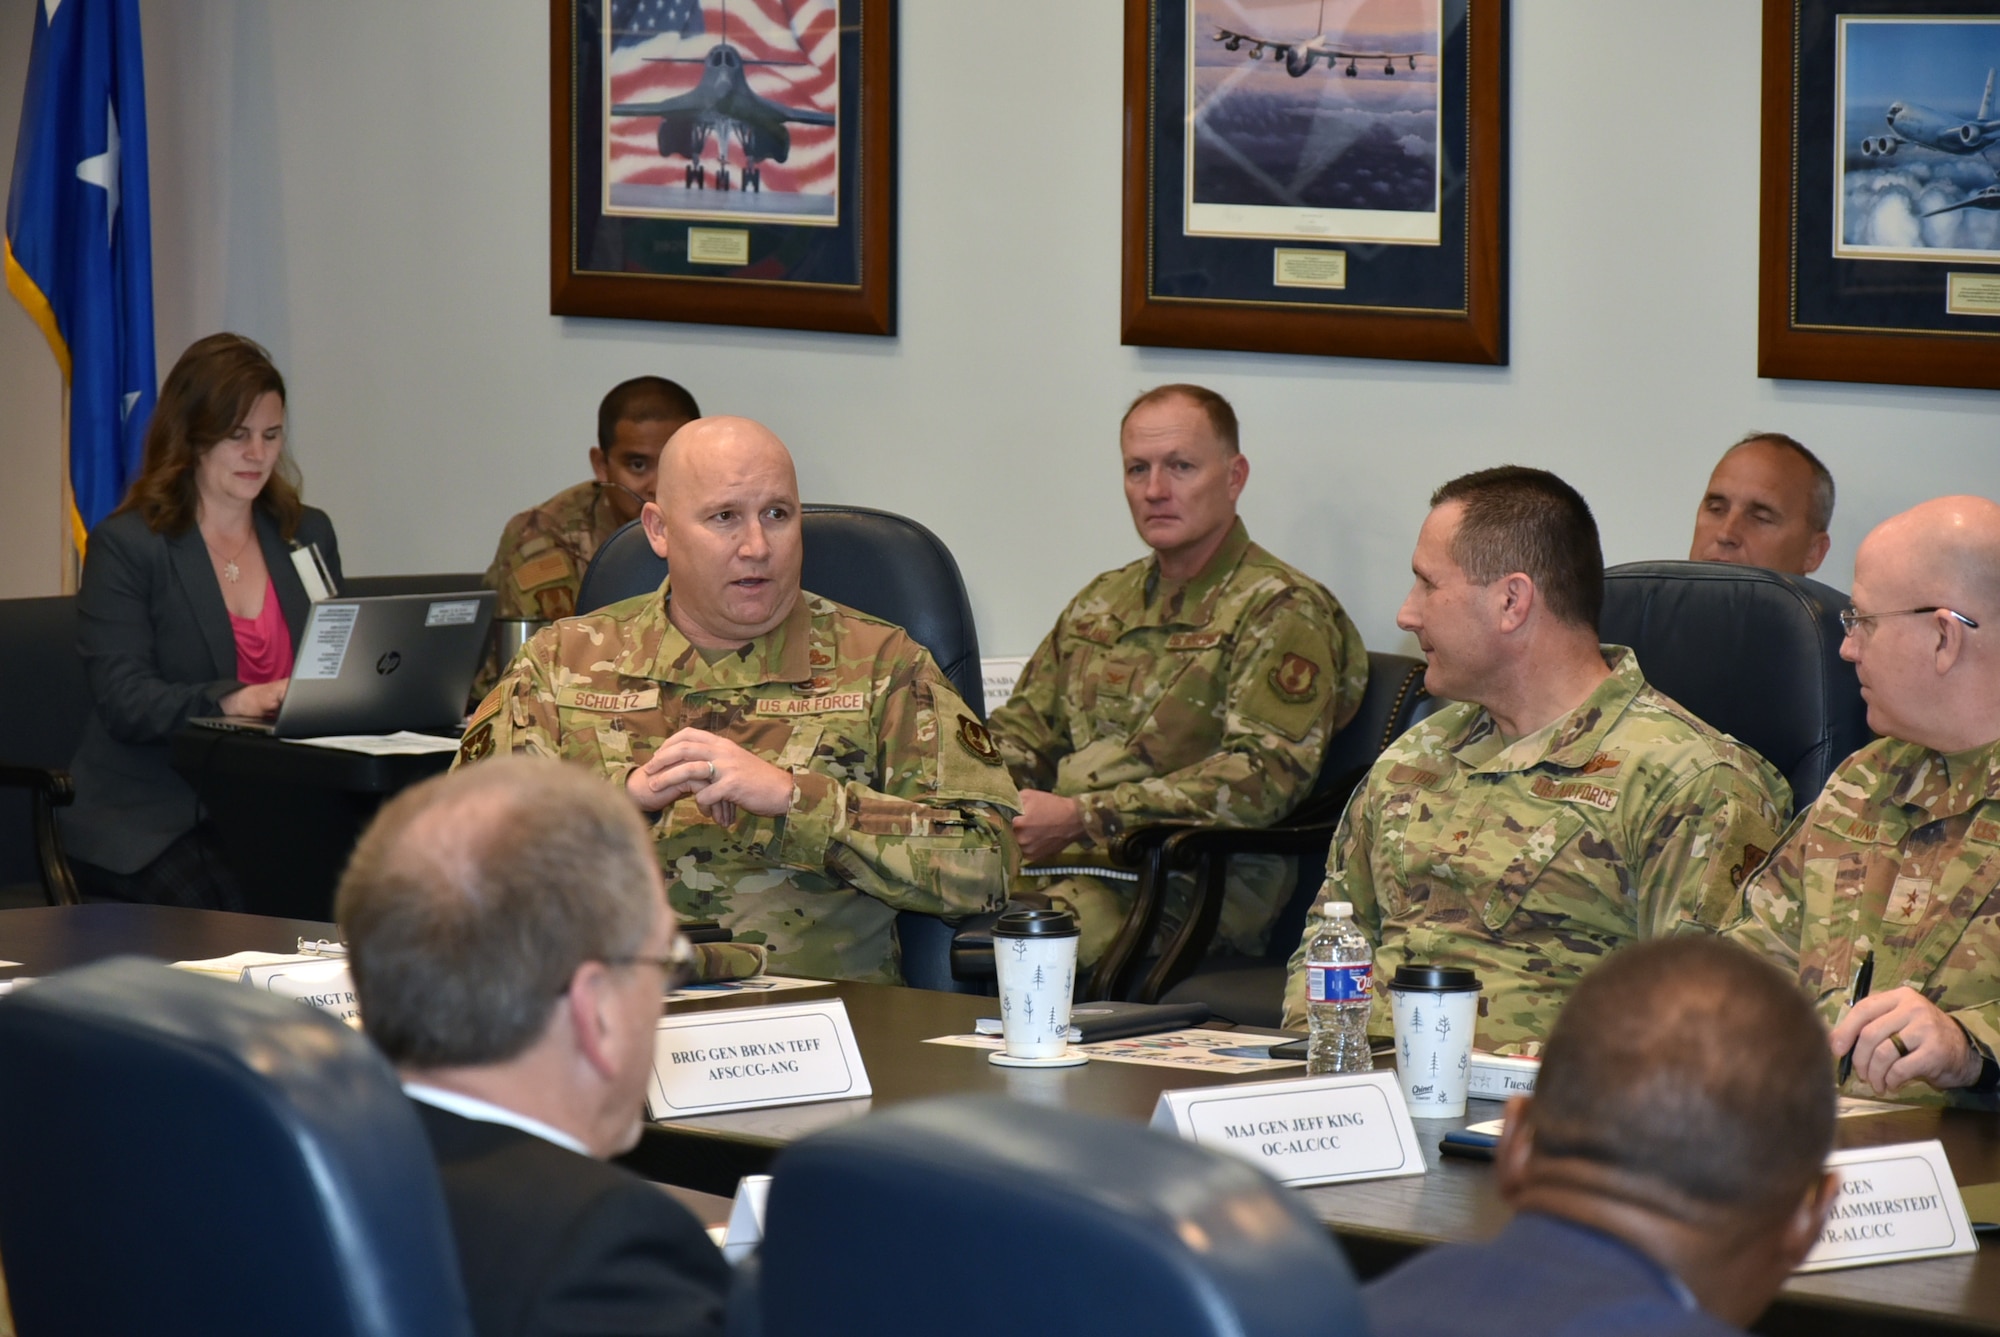 Commanders, directors and command chiefs from across the Air Force Sustainment Center enterprise gathered at the AFSC Commander’s Summit April 13-14 at Tinker Air Force Base, Oklahoma.